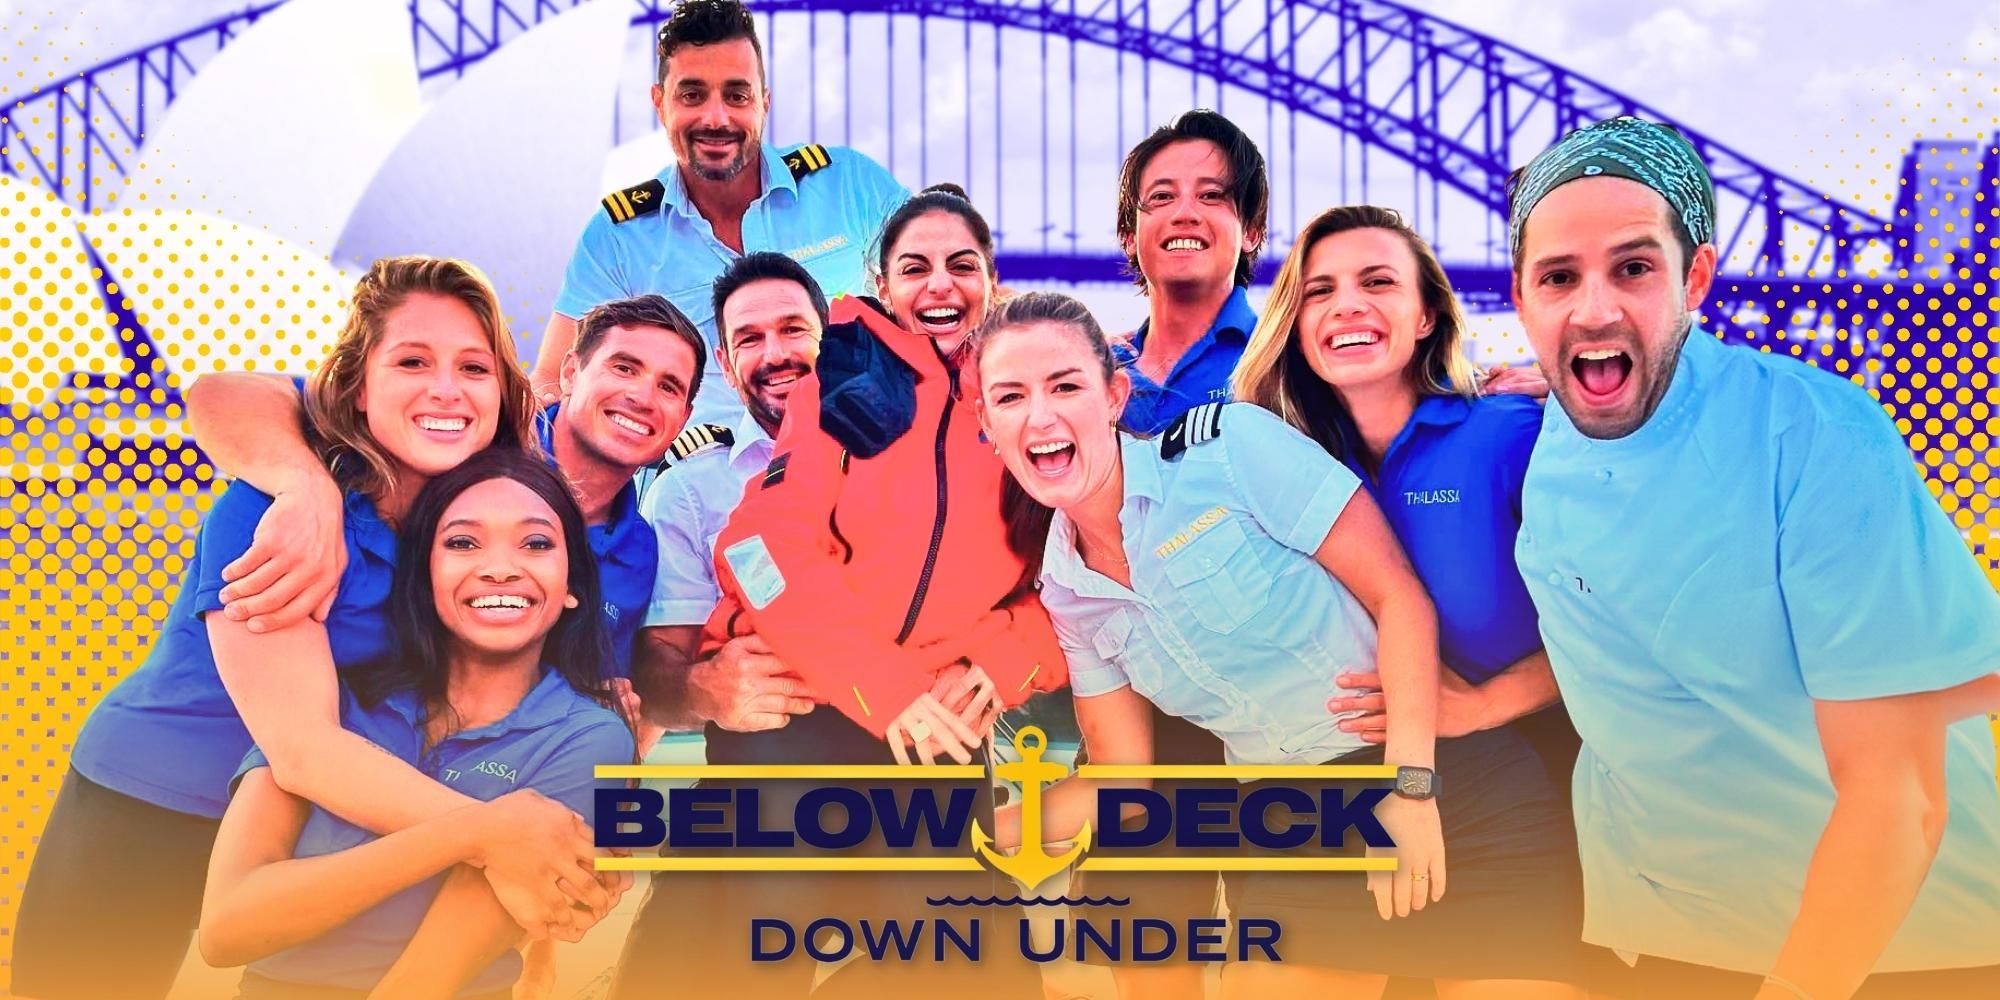  Below Deck Down Under Season 1 cast smiling together with bright colors